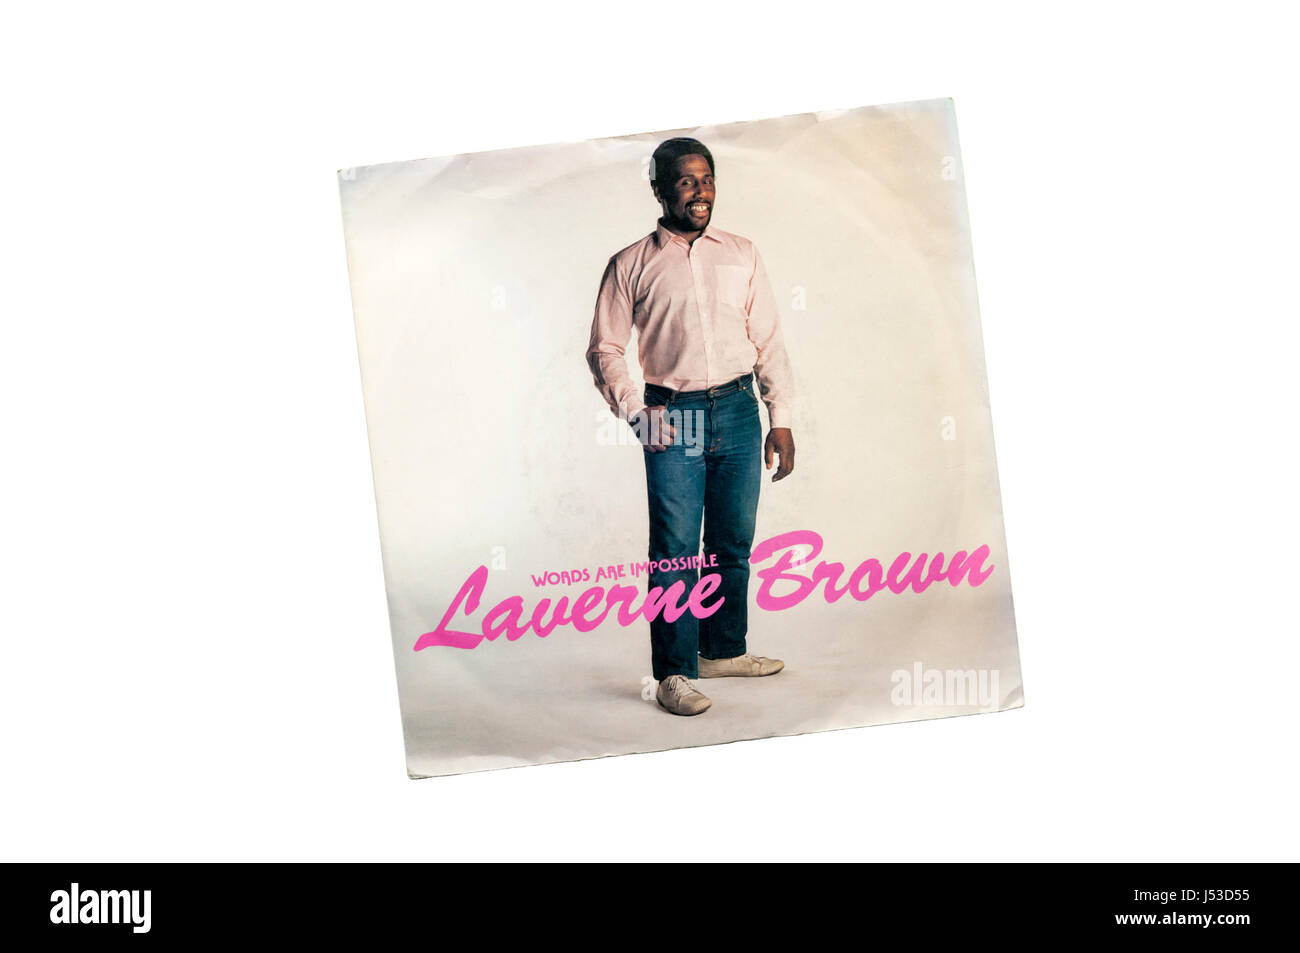 1982 7' single, Words are Impossible by Laverne Brown. Stock Photo